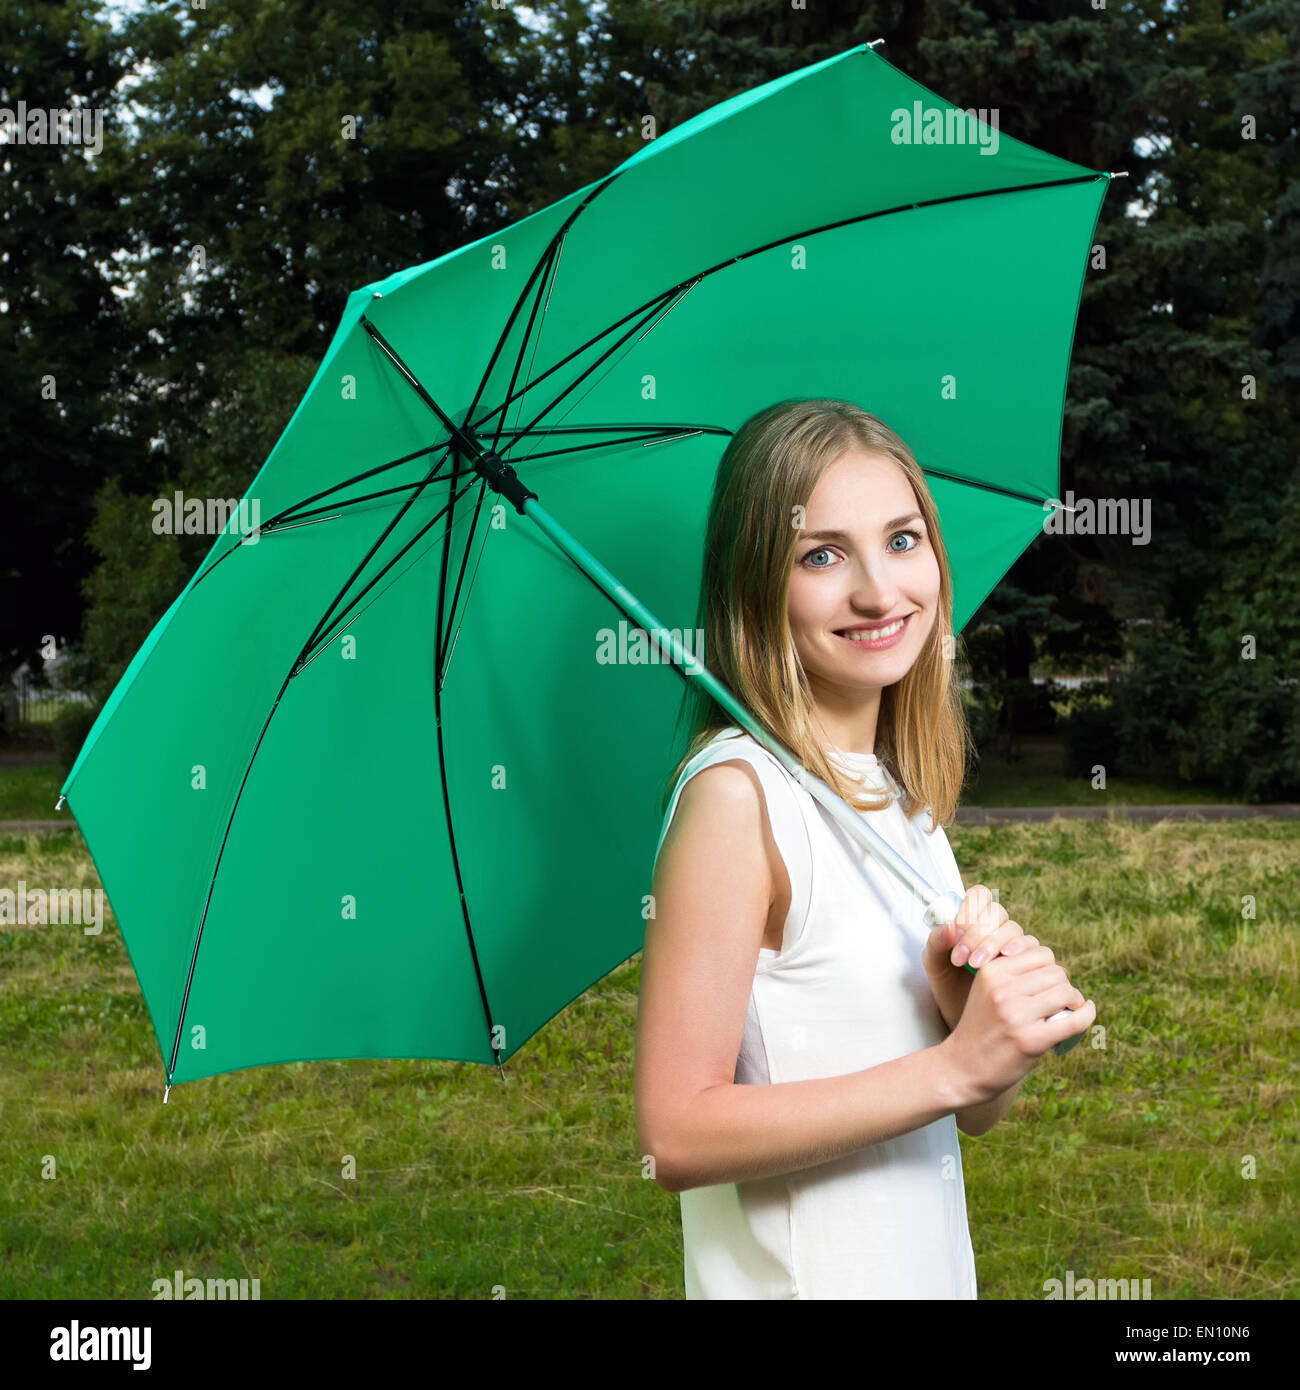 Beautiful smiling girl holding a green umbrella in a park Stock Photo